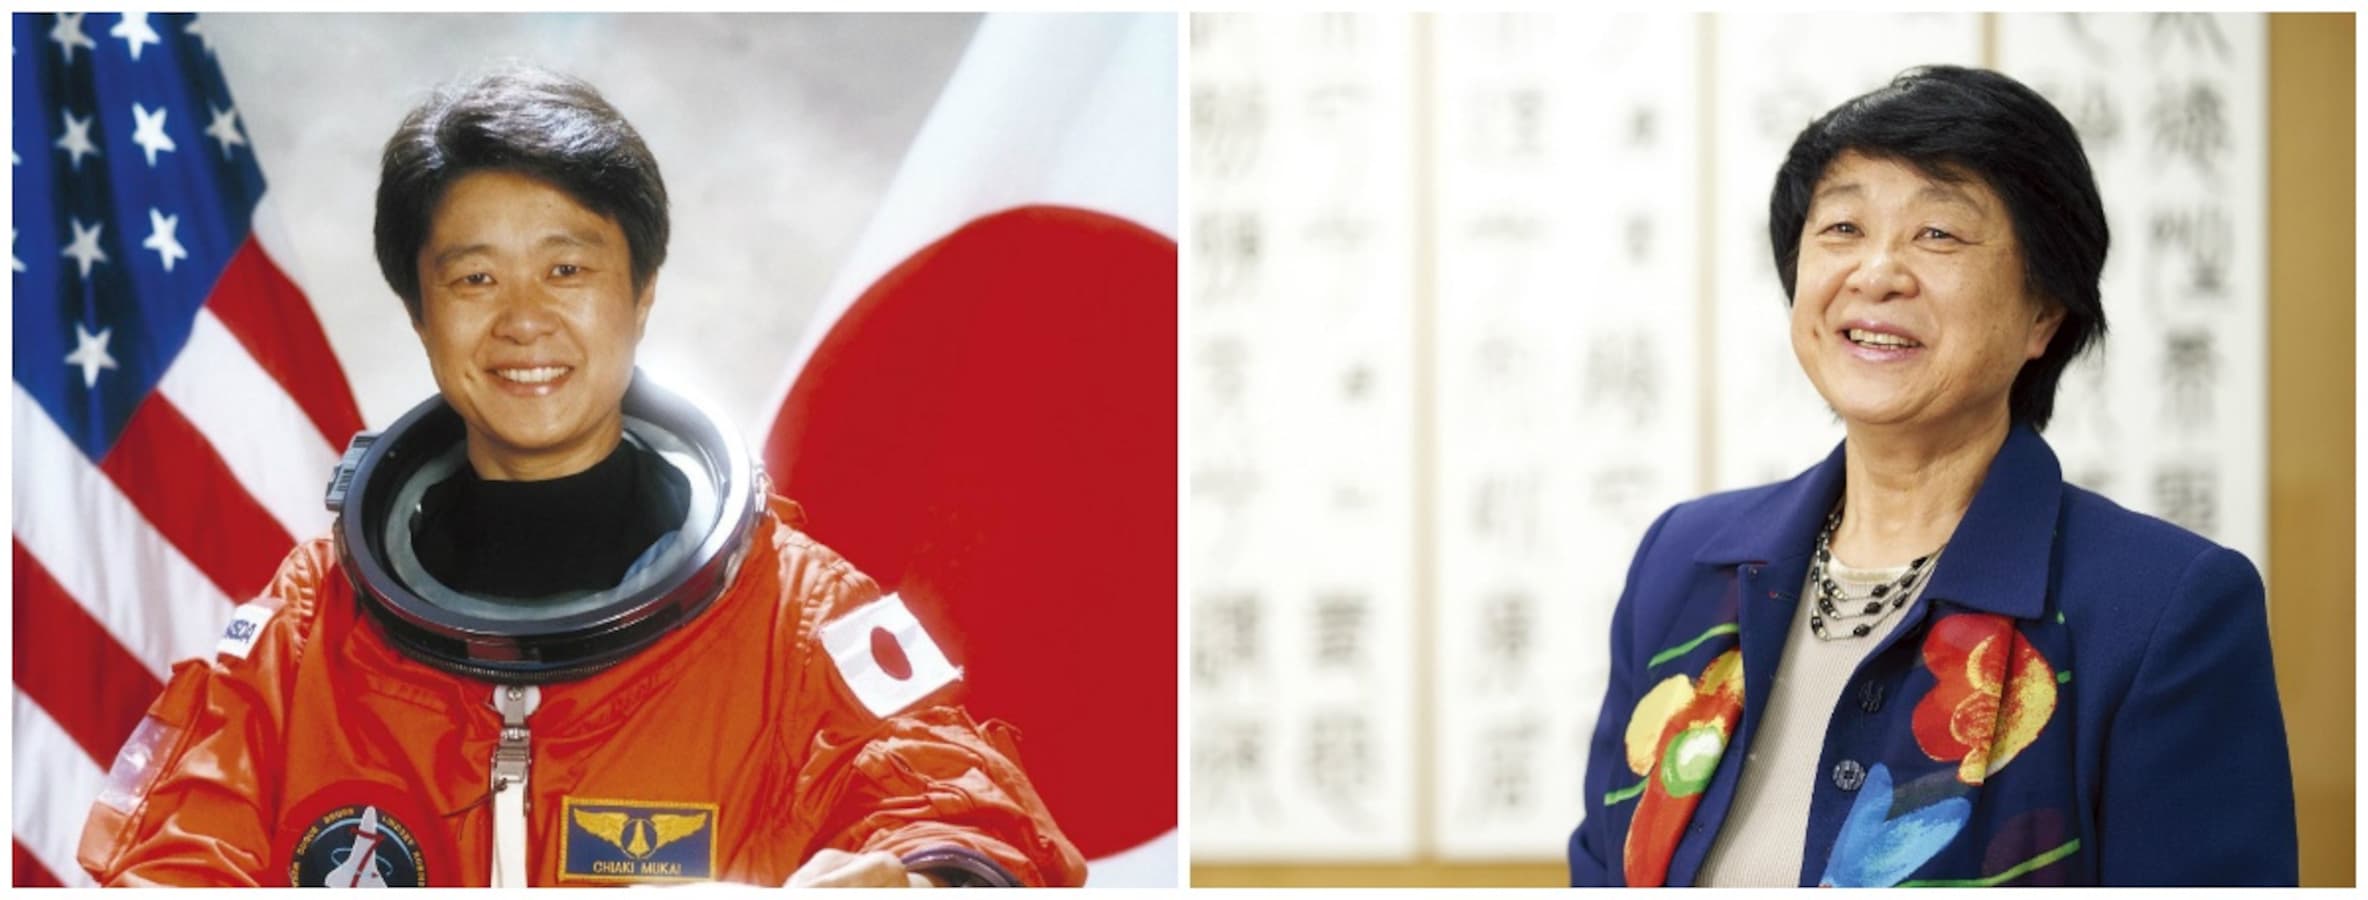 Driven Aloft: From Surgeon to Astronaut | All About Japan